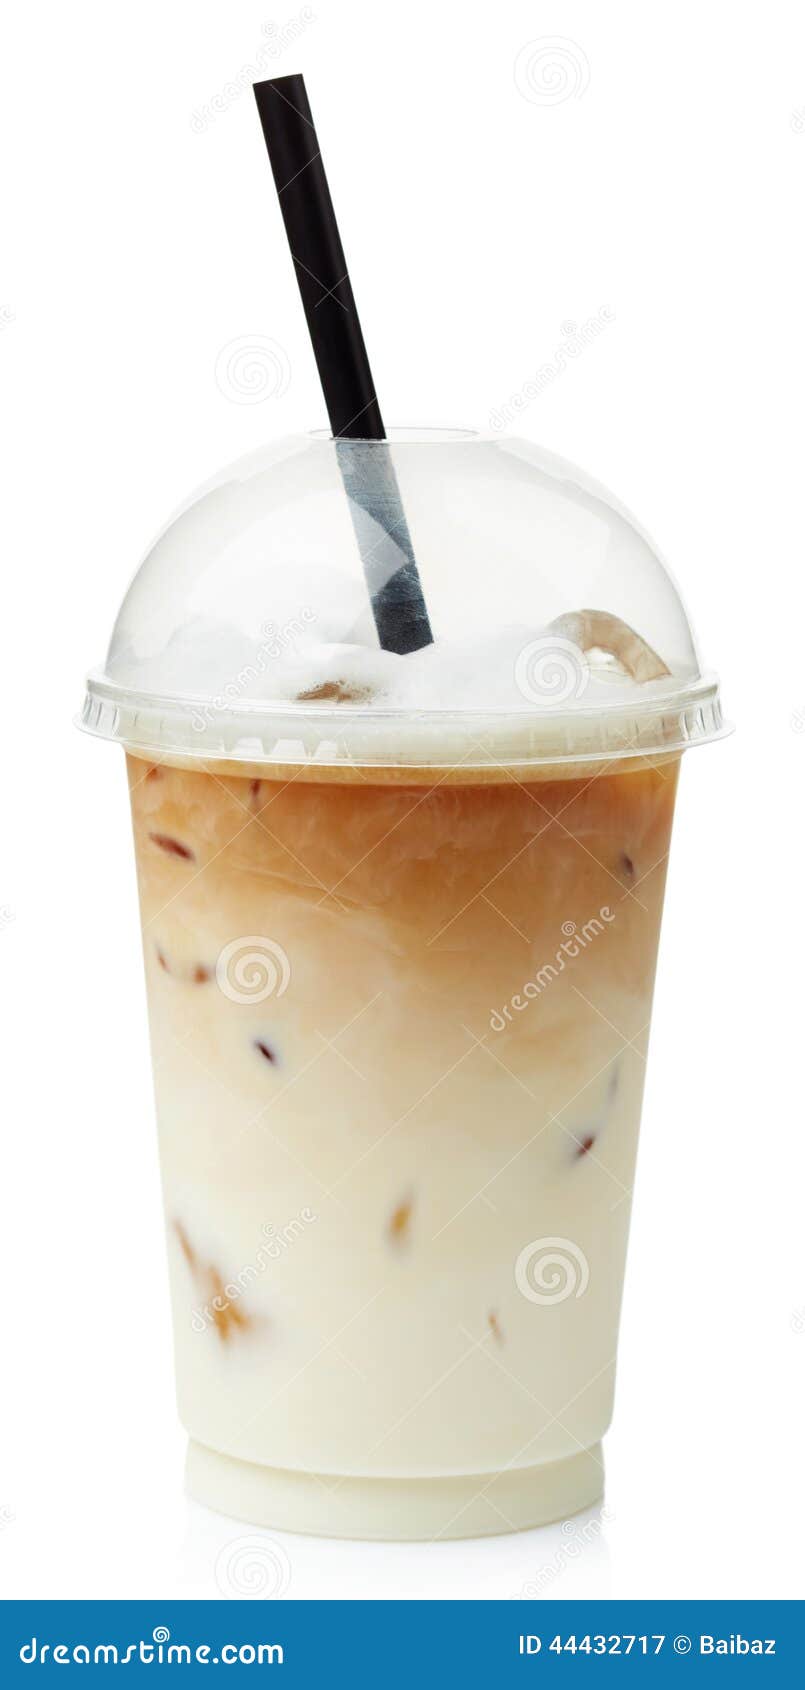 https://thumbs.dreamstime.com/z/iced-coffee-latte-plastic-glass-isolated-white-background-44432717.jpg